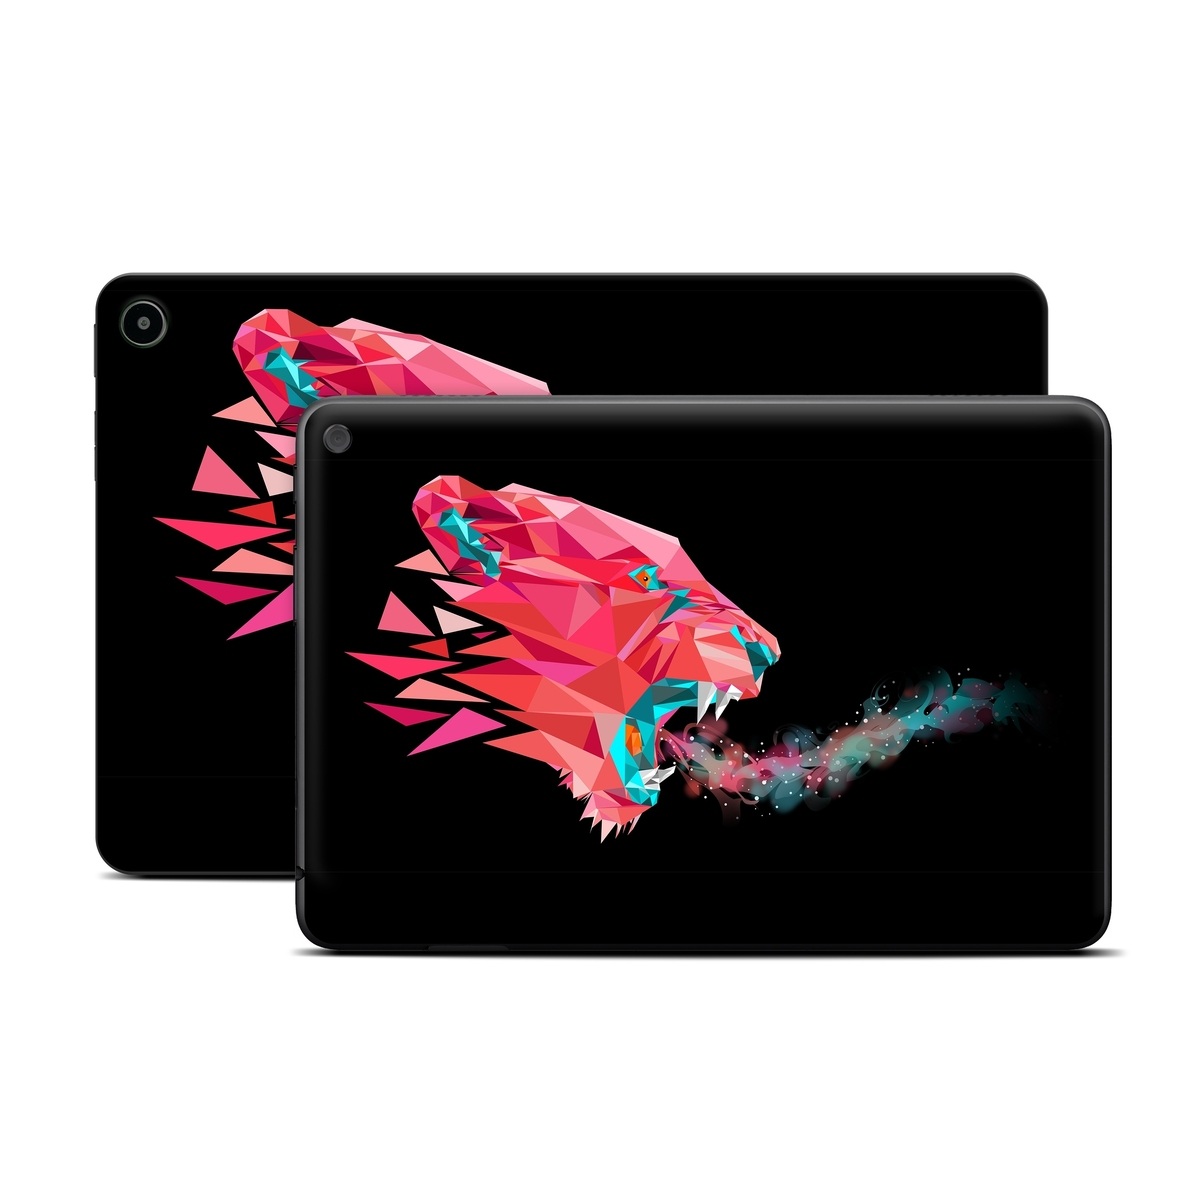 Amazon Fire Tablet Series Skin Skin design of Pink, Graphic design, Illustration, Design, Organism, Graphics, Font, Art, Animation, Pattern, with black, red, pink, gray colors